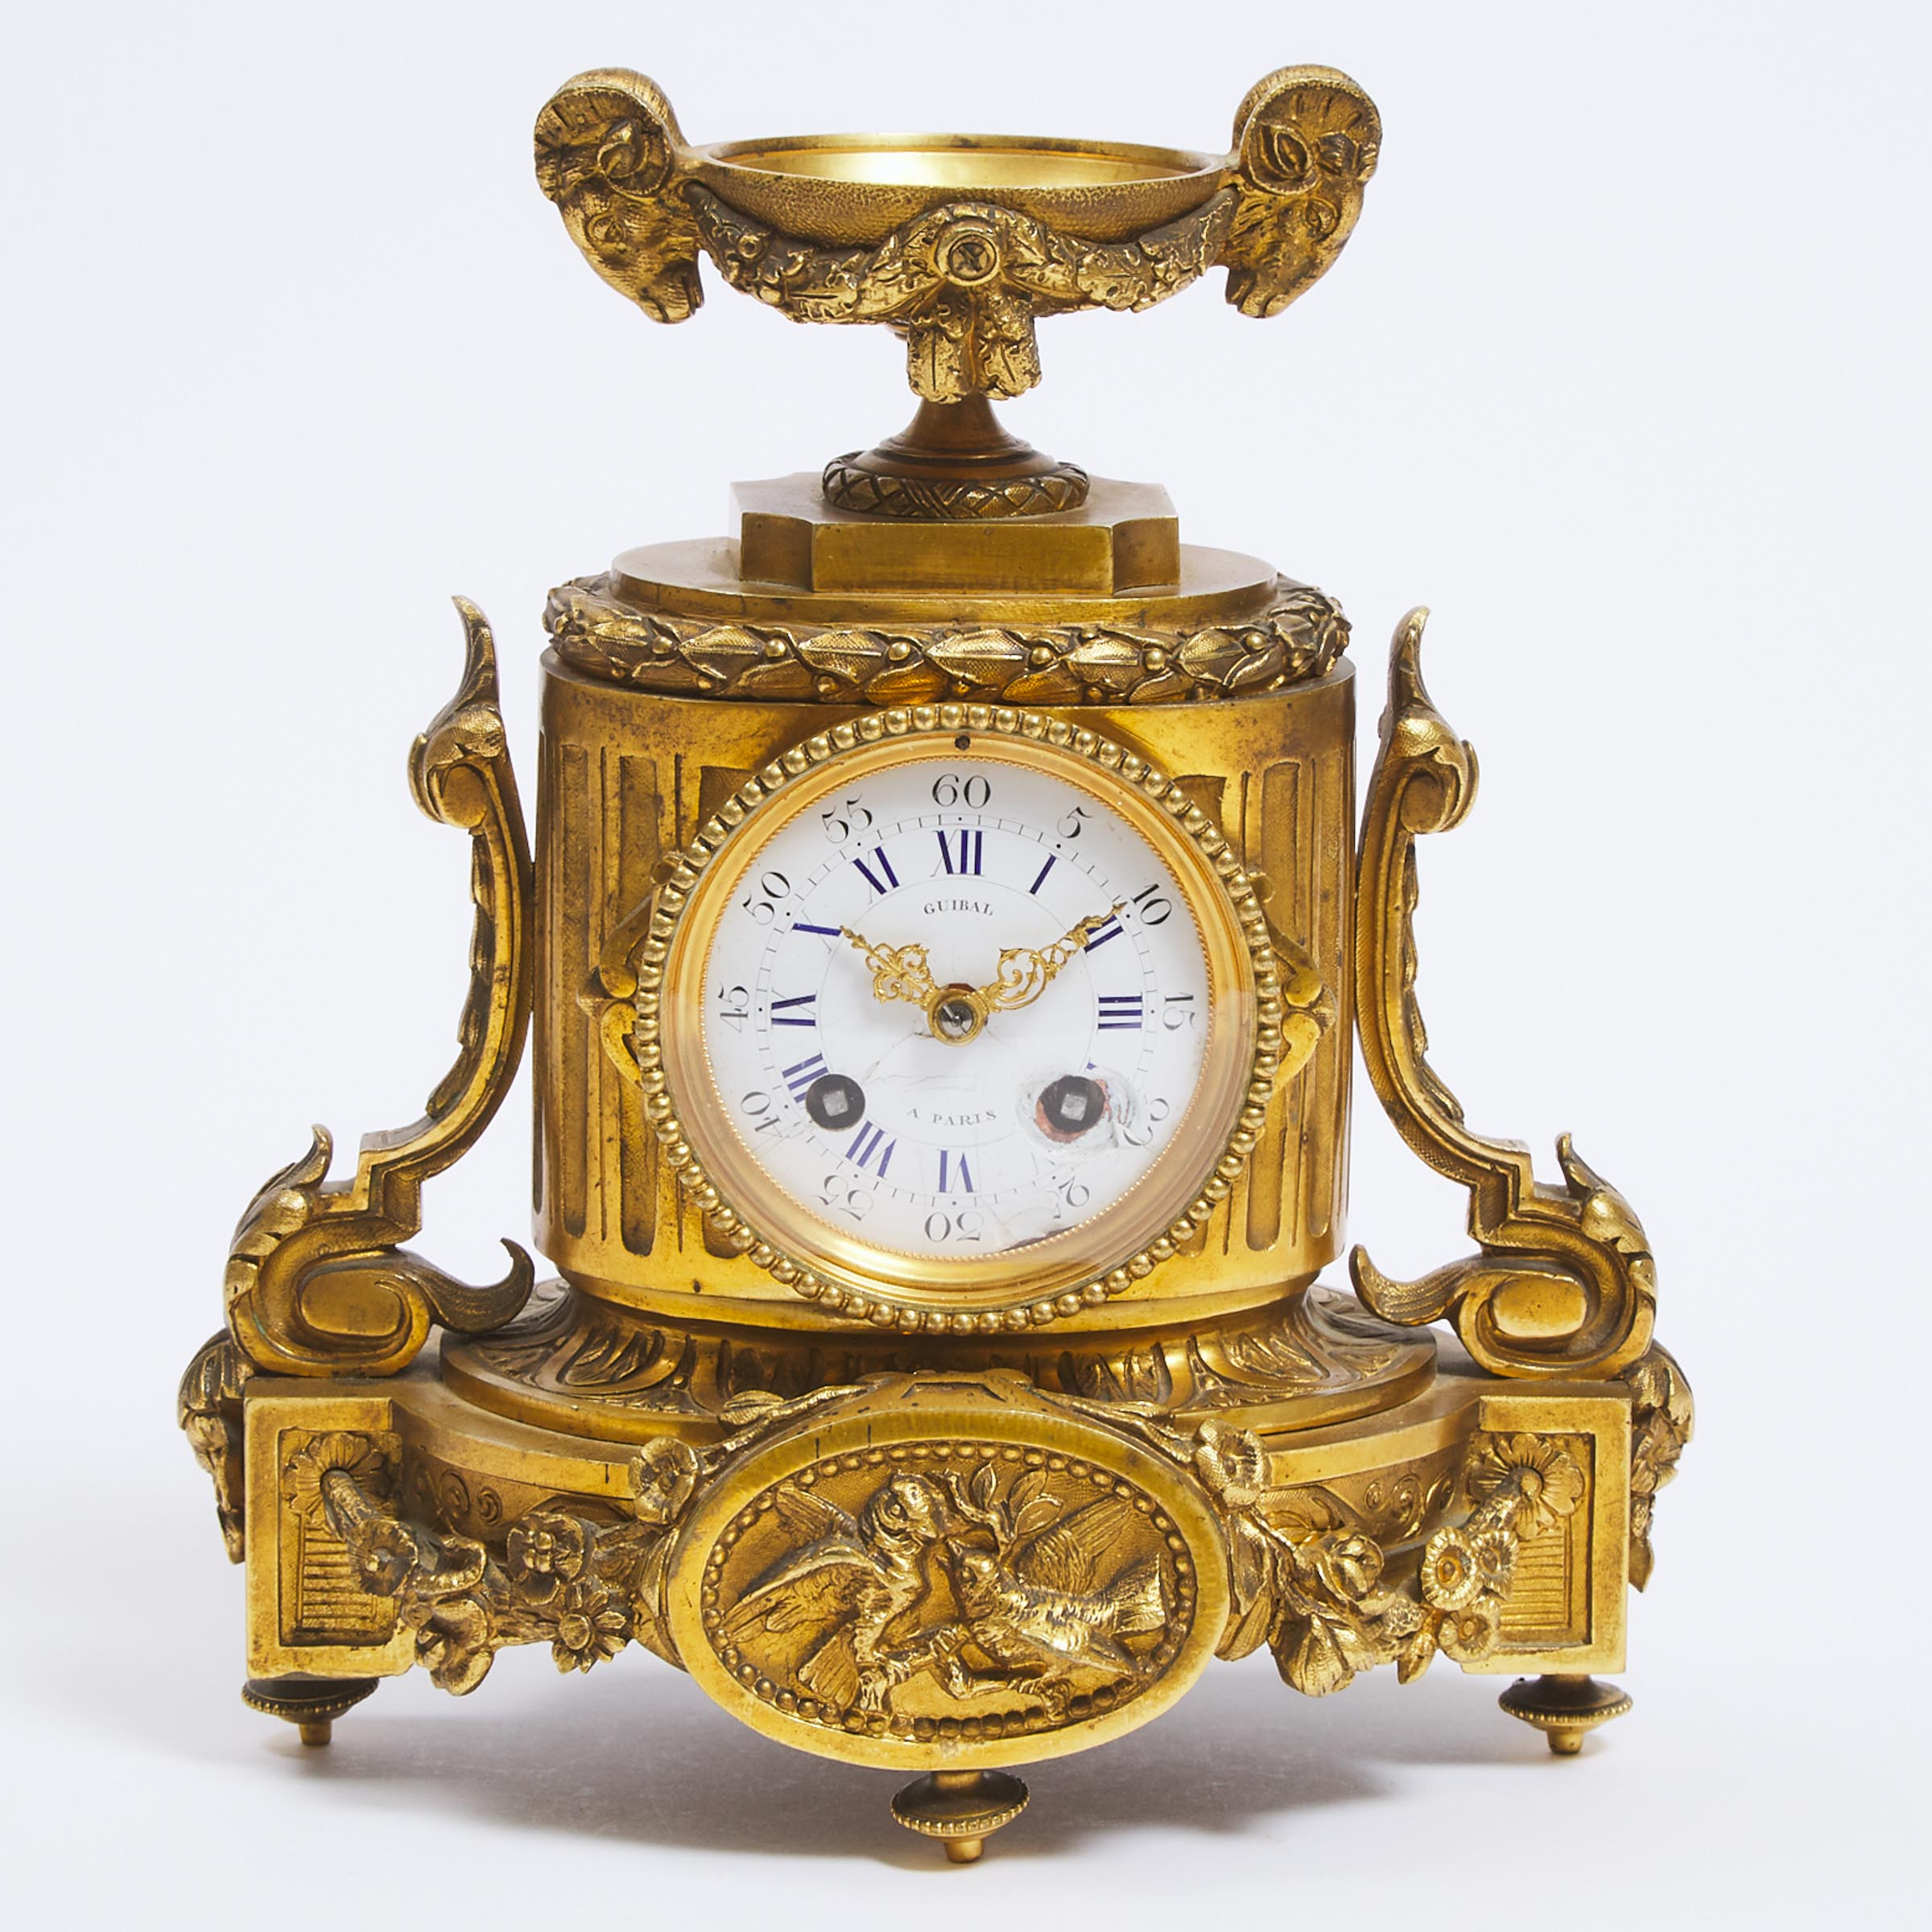 Small French Gilt Bronze Mantle Clock, Guibal a Paris, mid 19th century